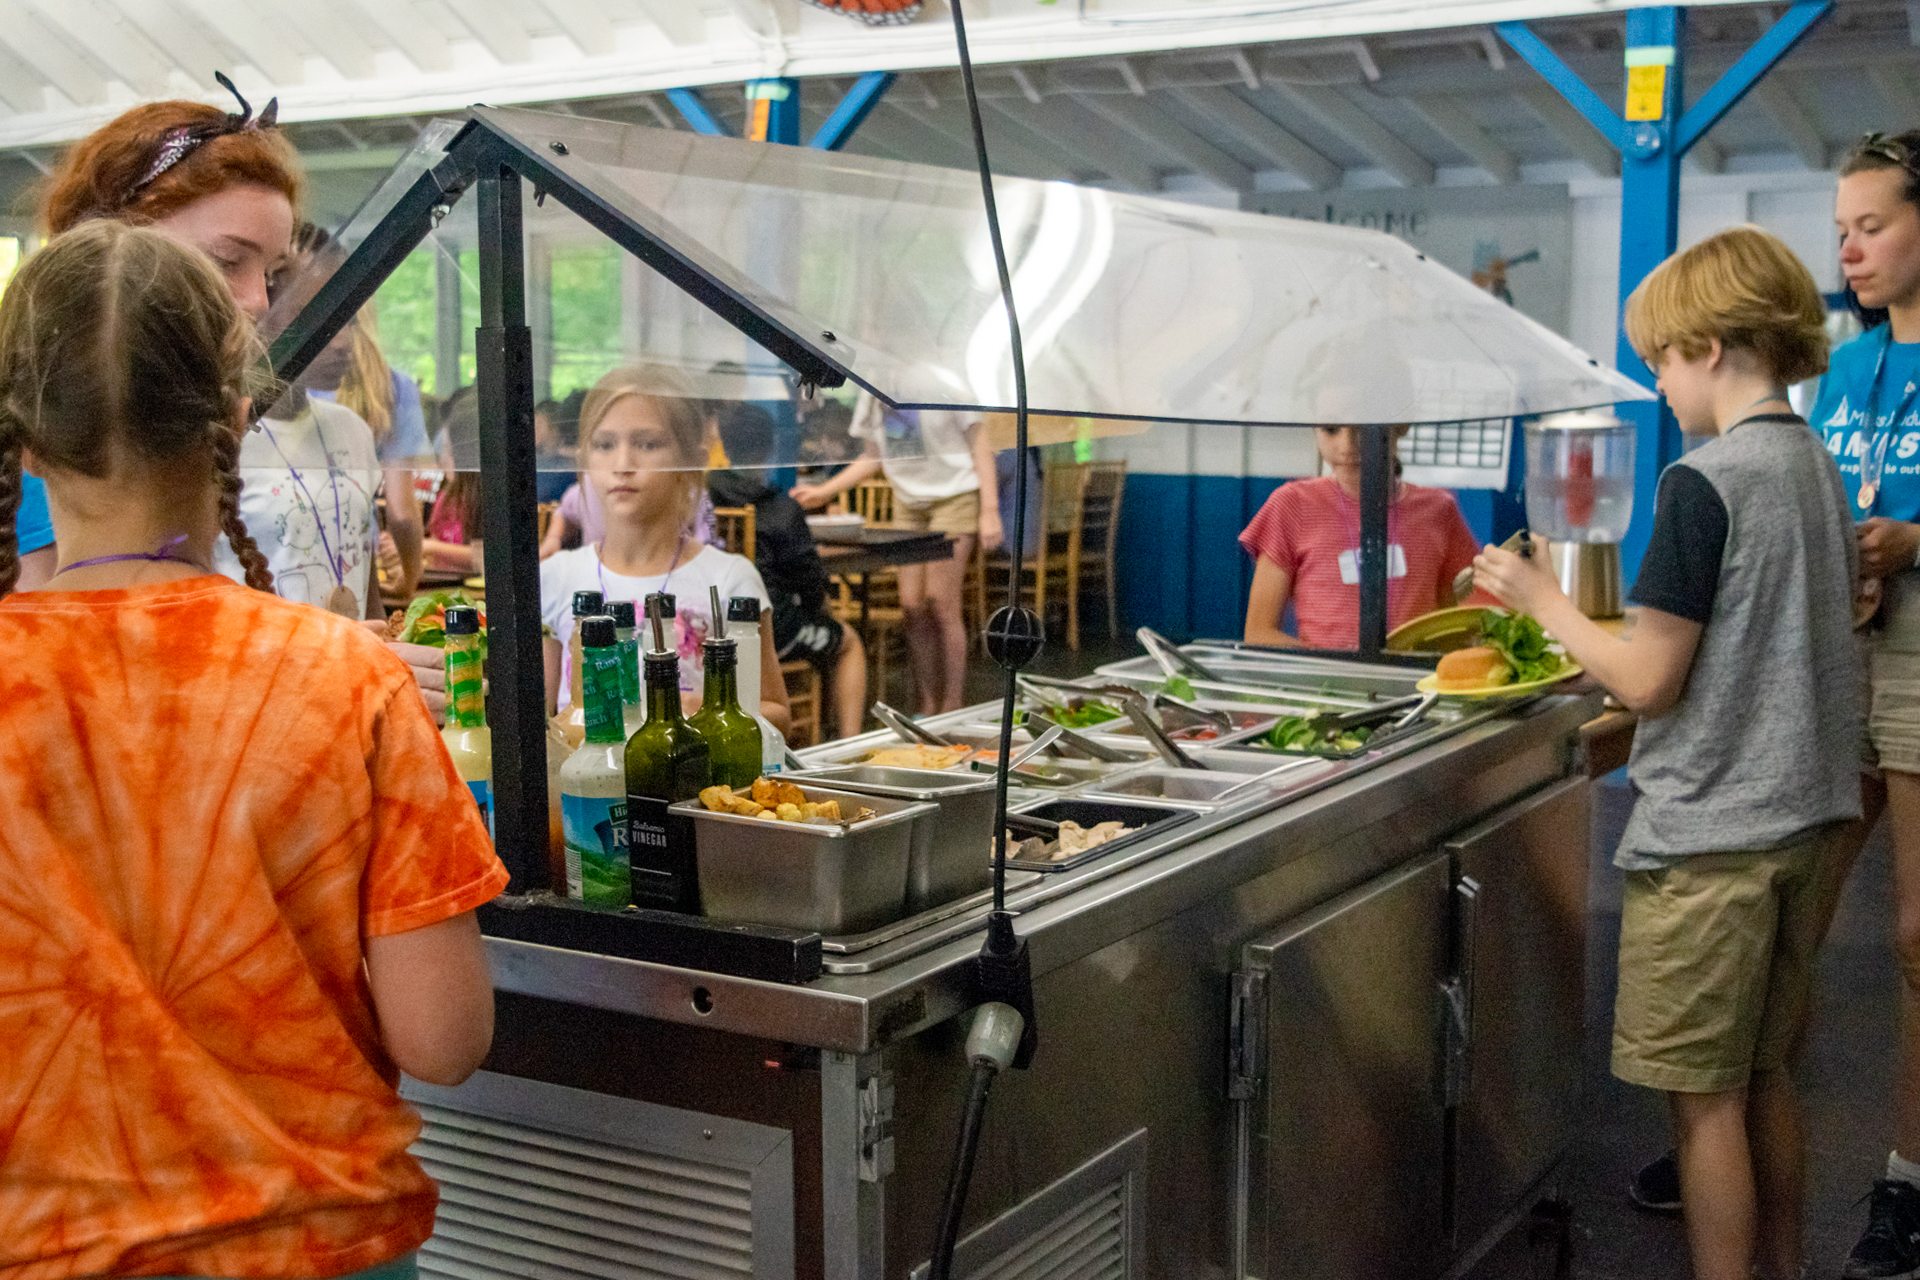 Campers and counselors load up their plates at the salad bar in Wildwood's dining hall